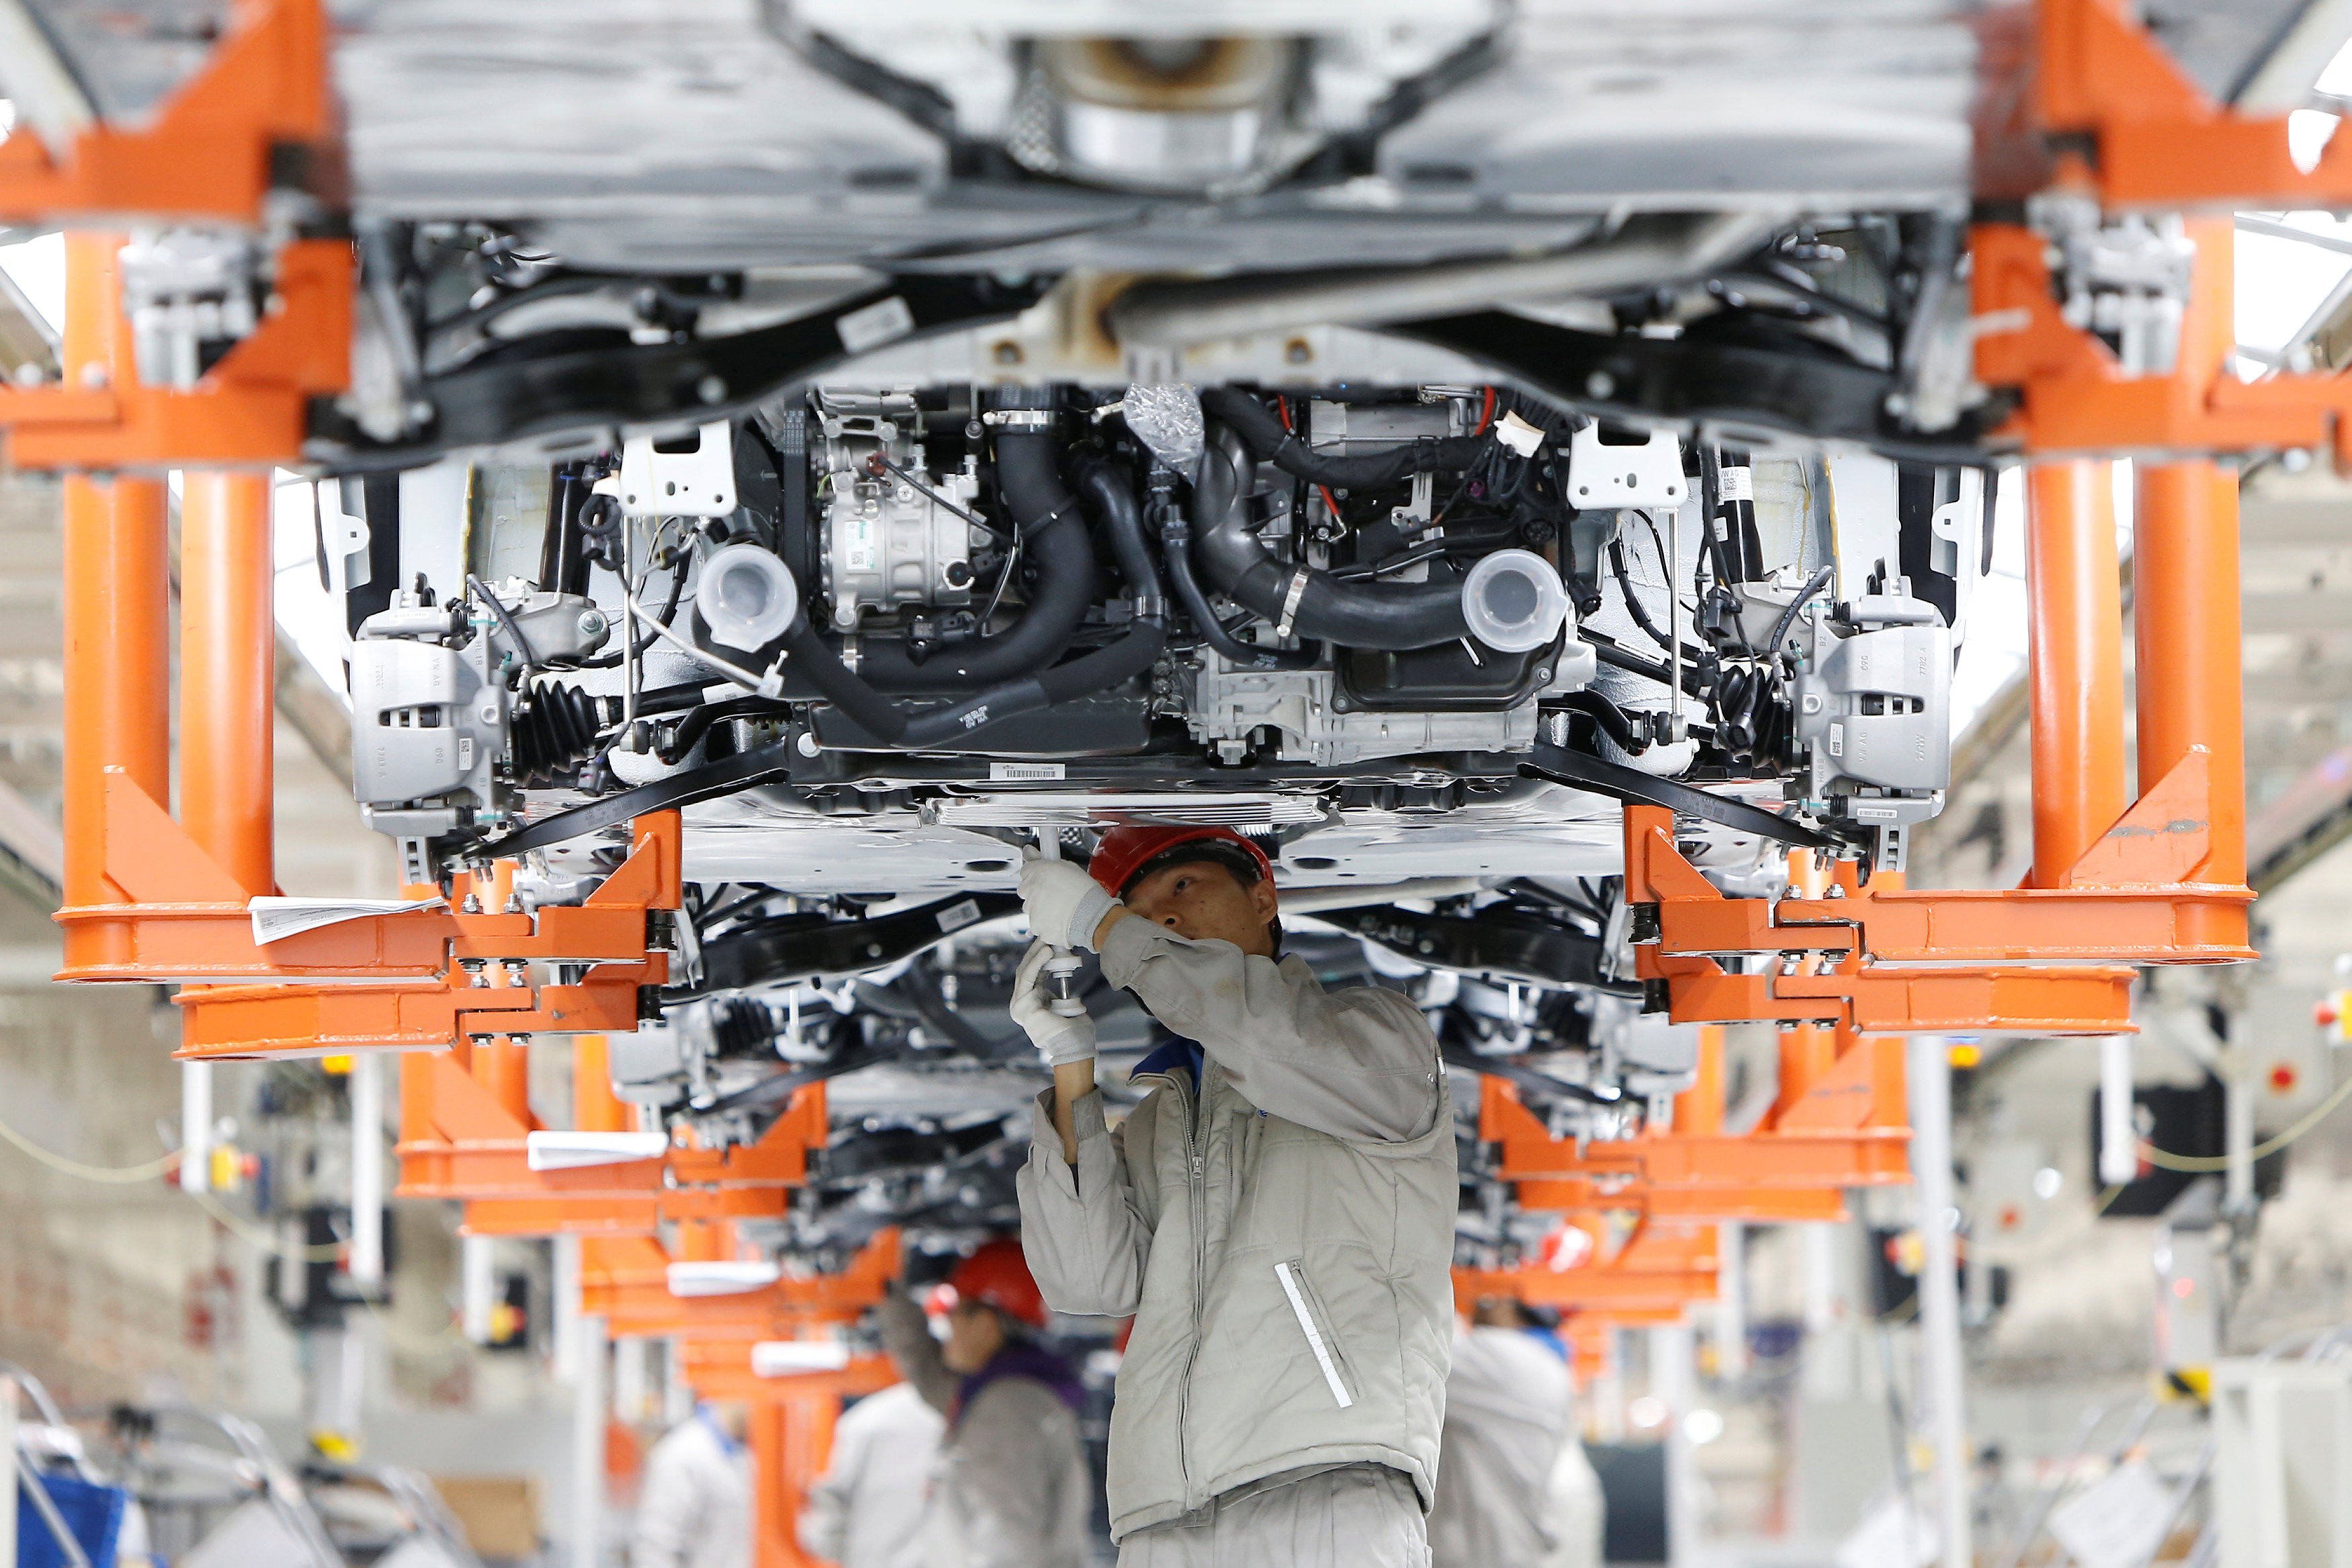 Workers on a production line for Volkswagen Tayron cars at the FAW-Volkswagen plant in Tianjin. Photo: Reuters